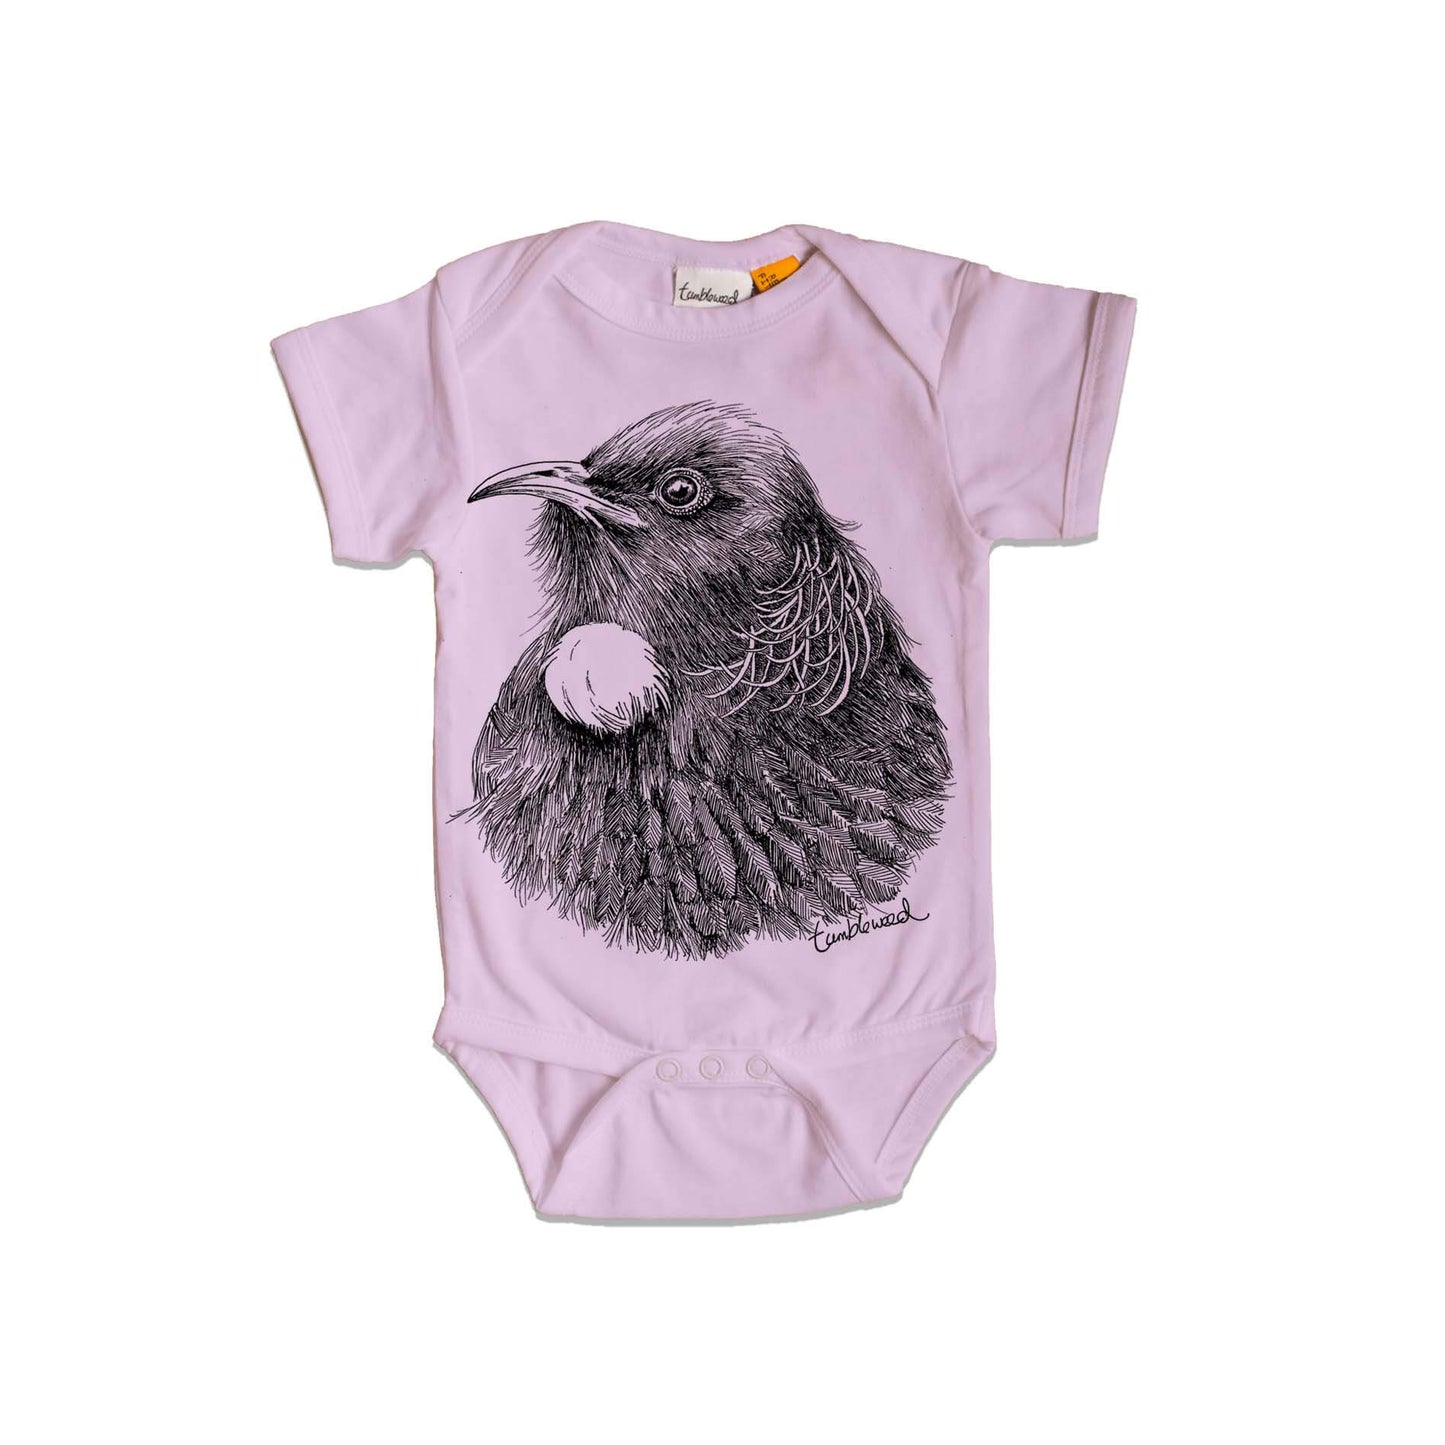 Short sleeved, purple, organic cotton, baby onesie featuring a screen printed Tui design.
 design.